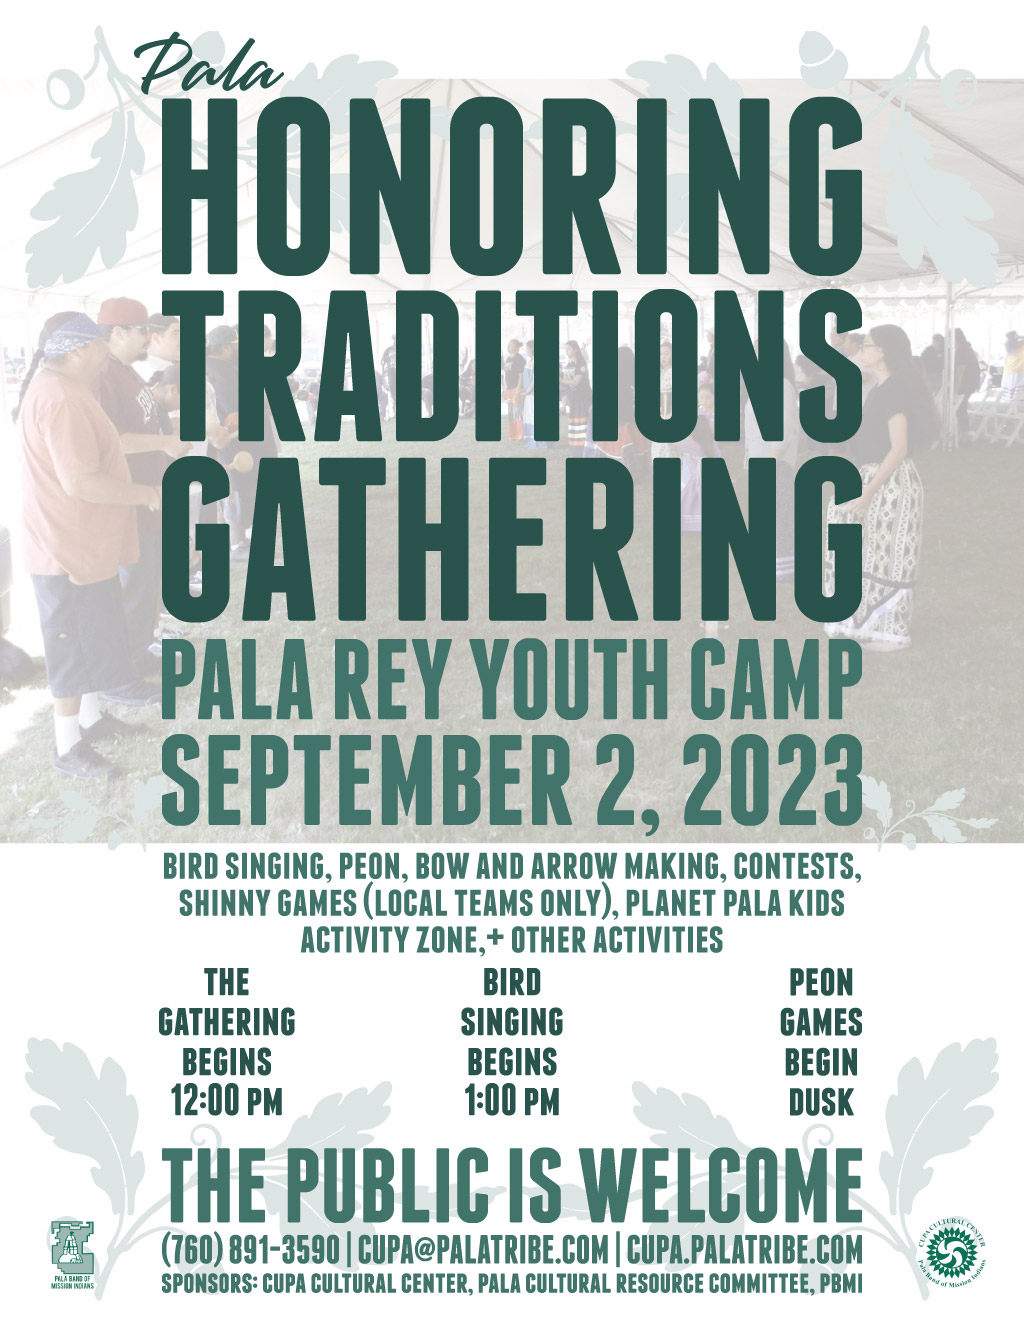 Pala Band California Cupa Cultural Center Event Honoring Traditions Gathering Pala Rey Youth Campo Cupeno